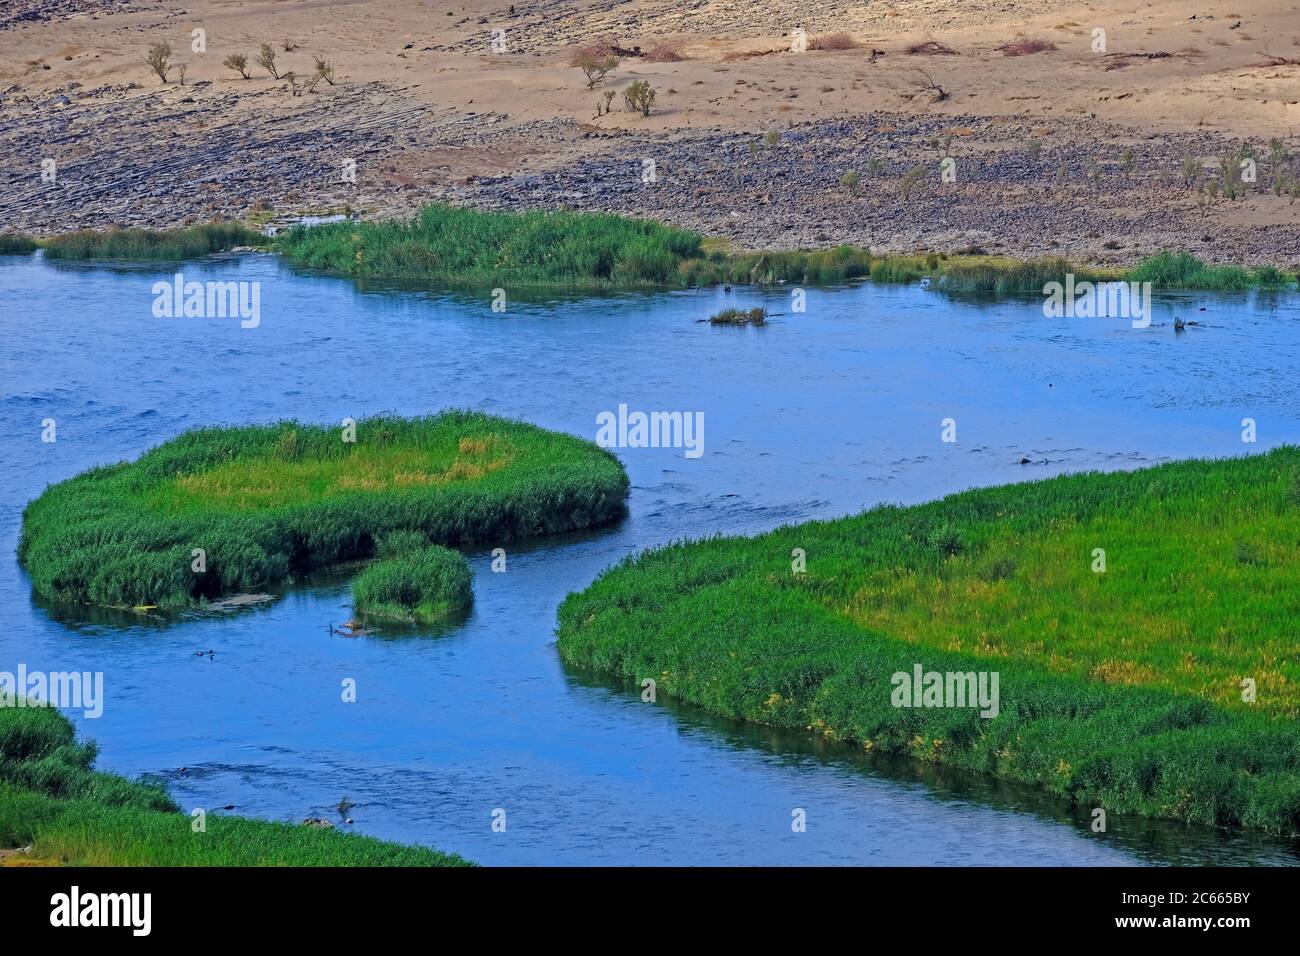 View from a rock onto the reedy riverbed of the border river Oranje between Namibia and South Africa. Stock Photo